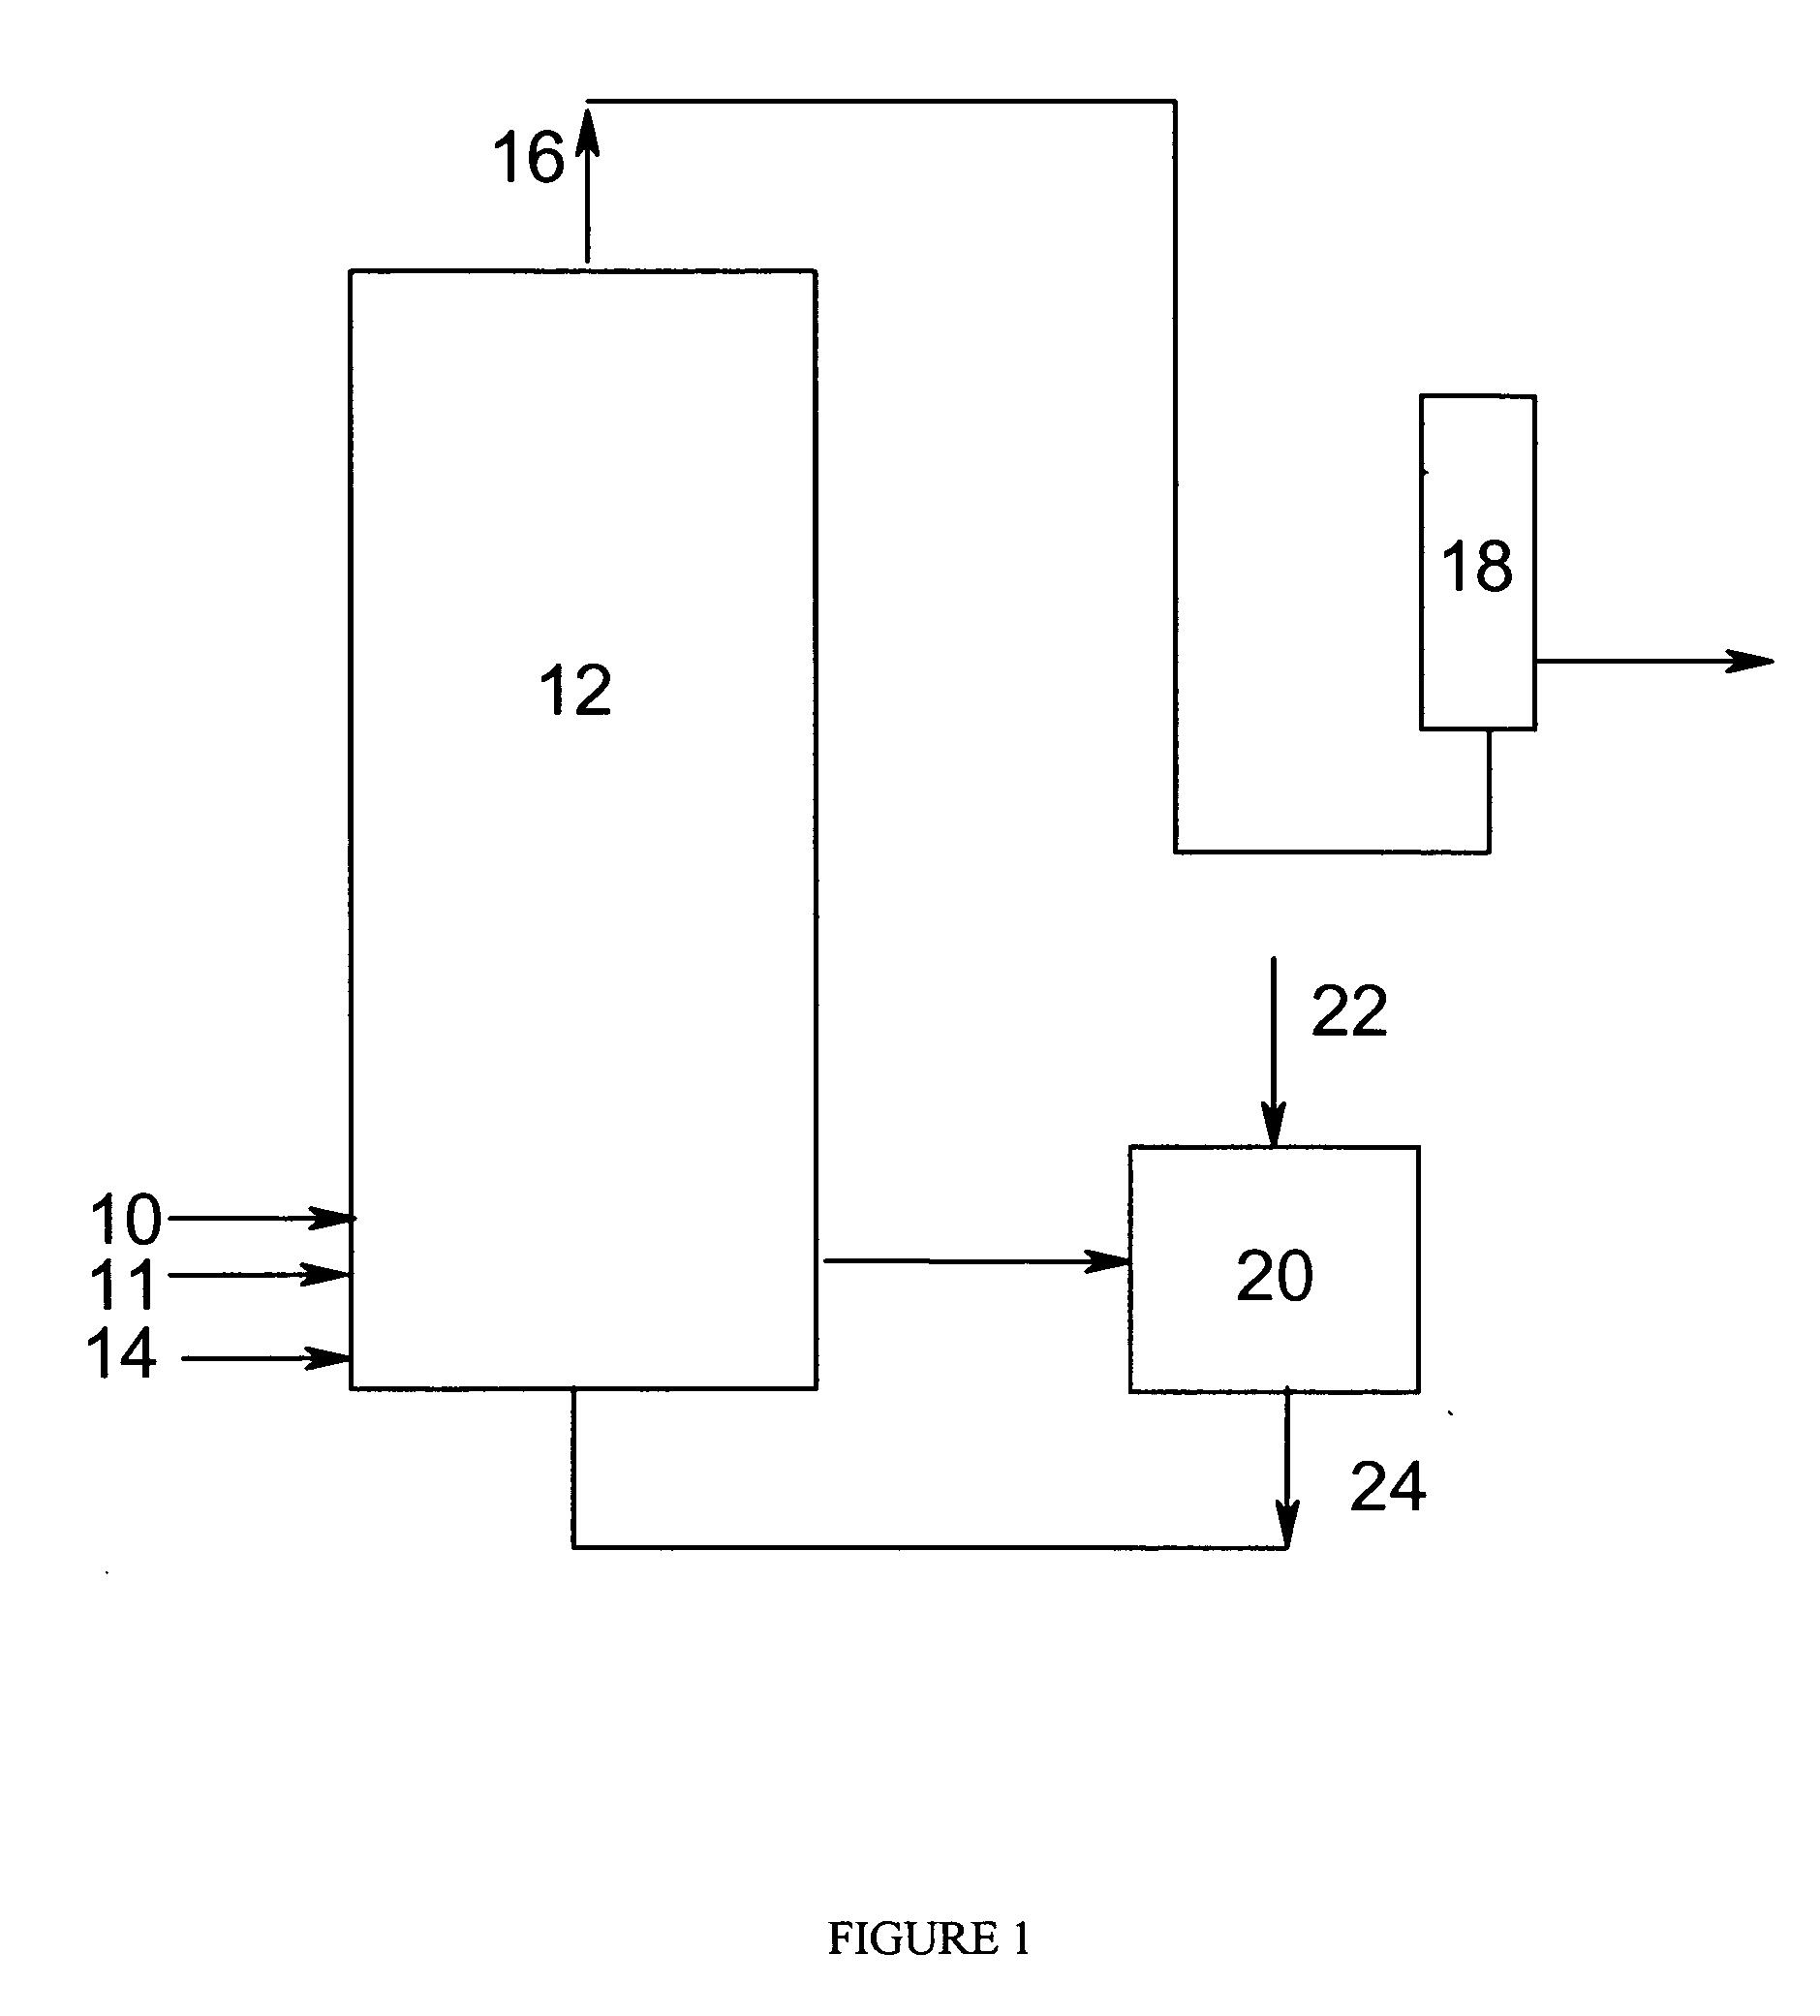 Processes for producing terephthalic acid